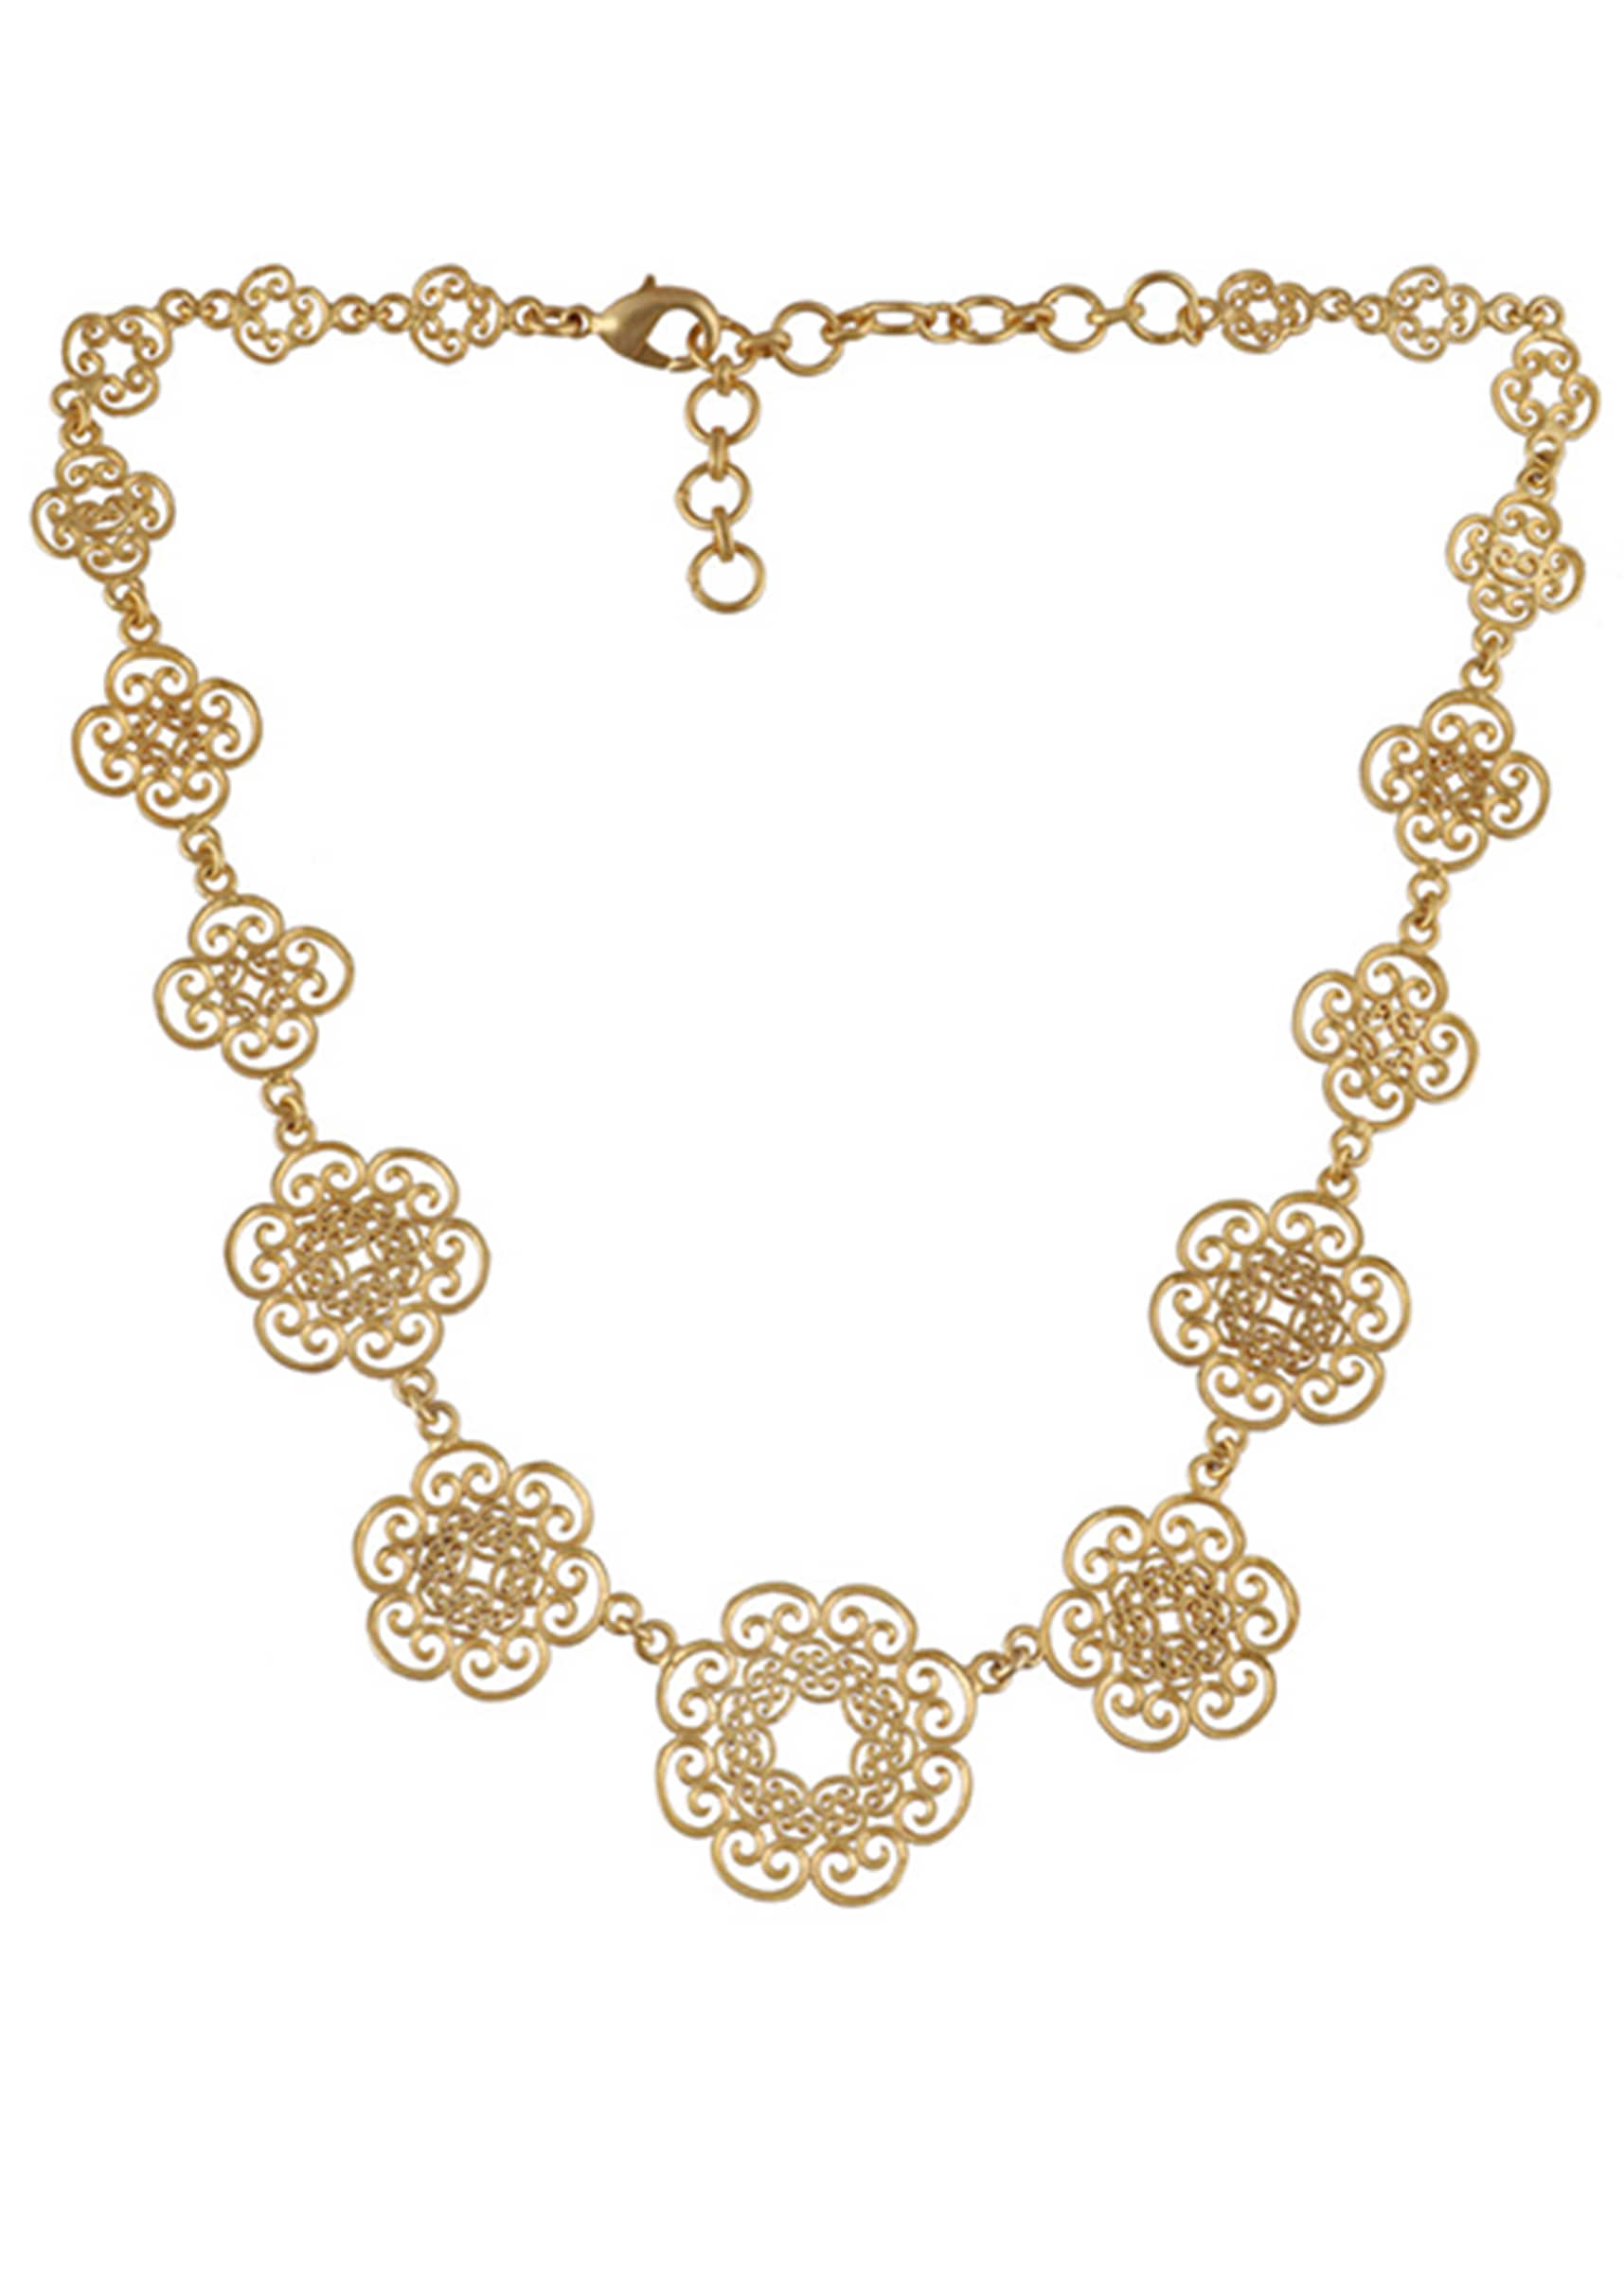 Gold Plated Necklace In Floral Motifs With Delicate Filigree Design And Pearls By Zariin